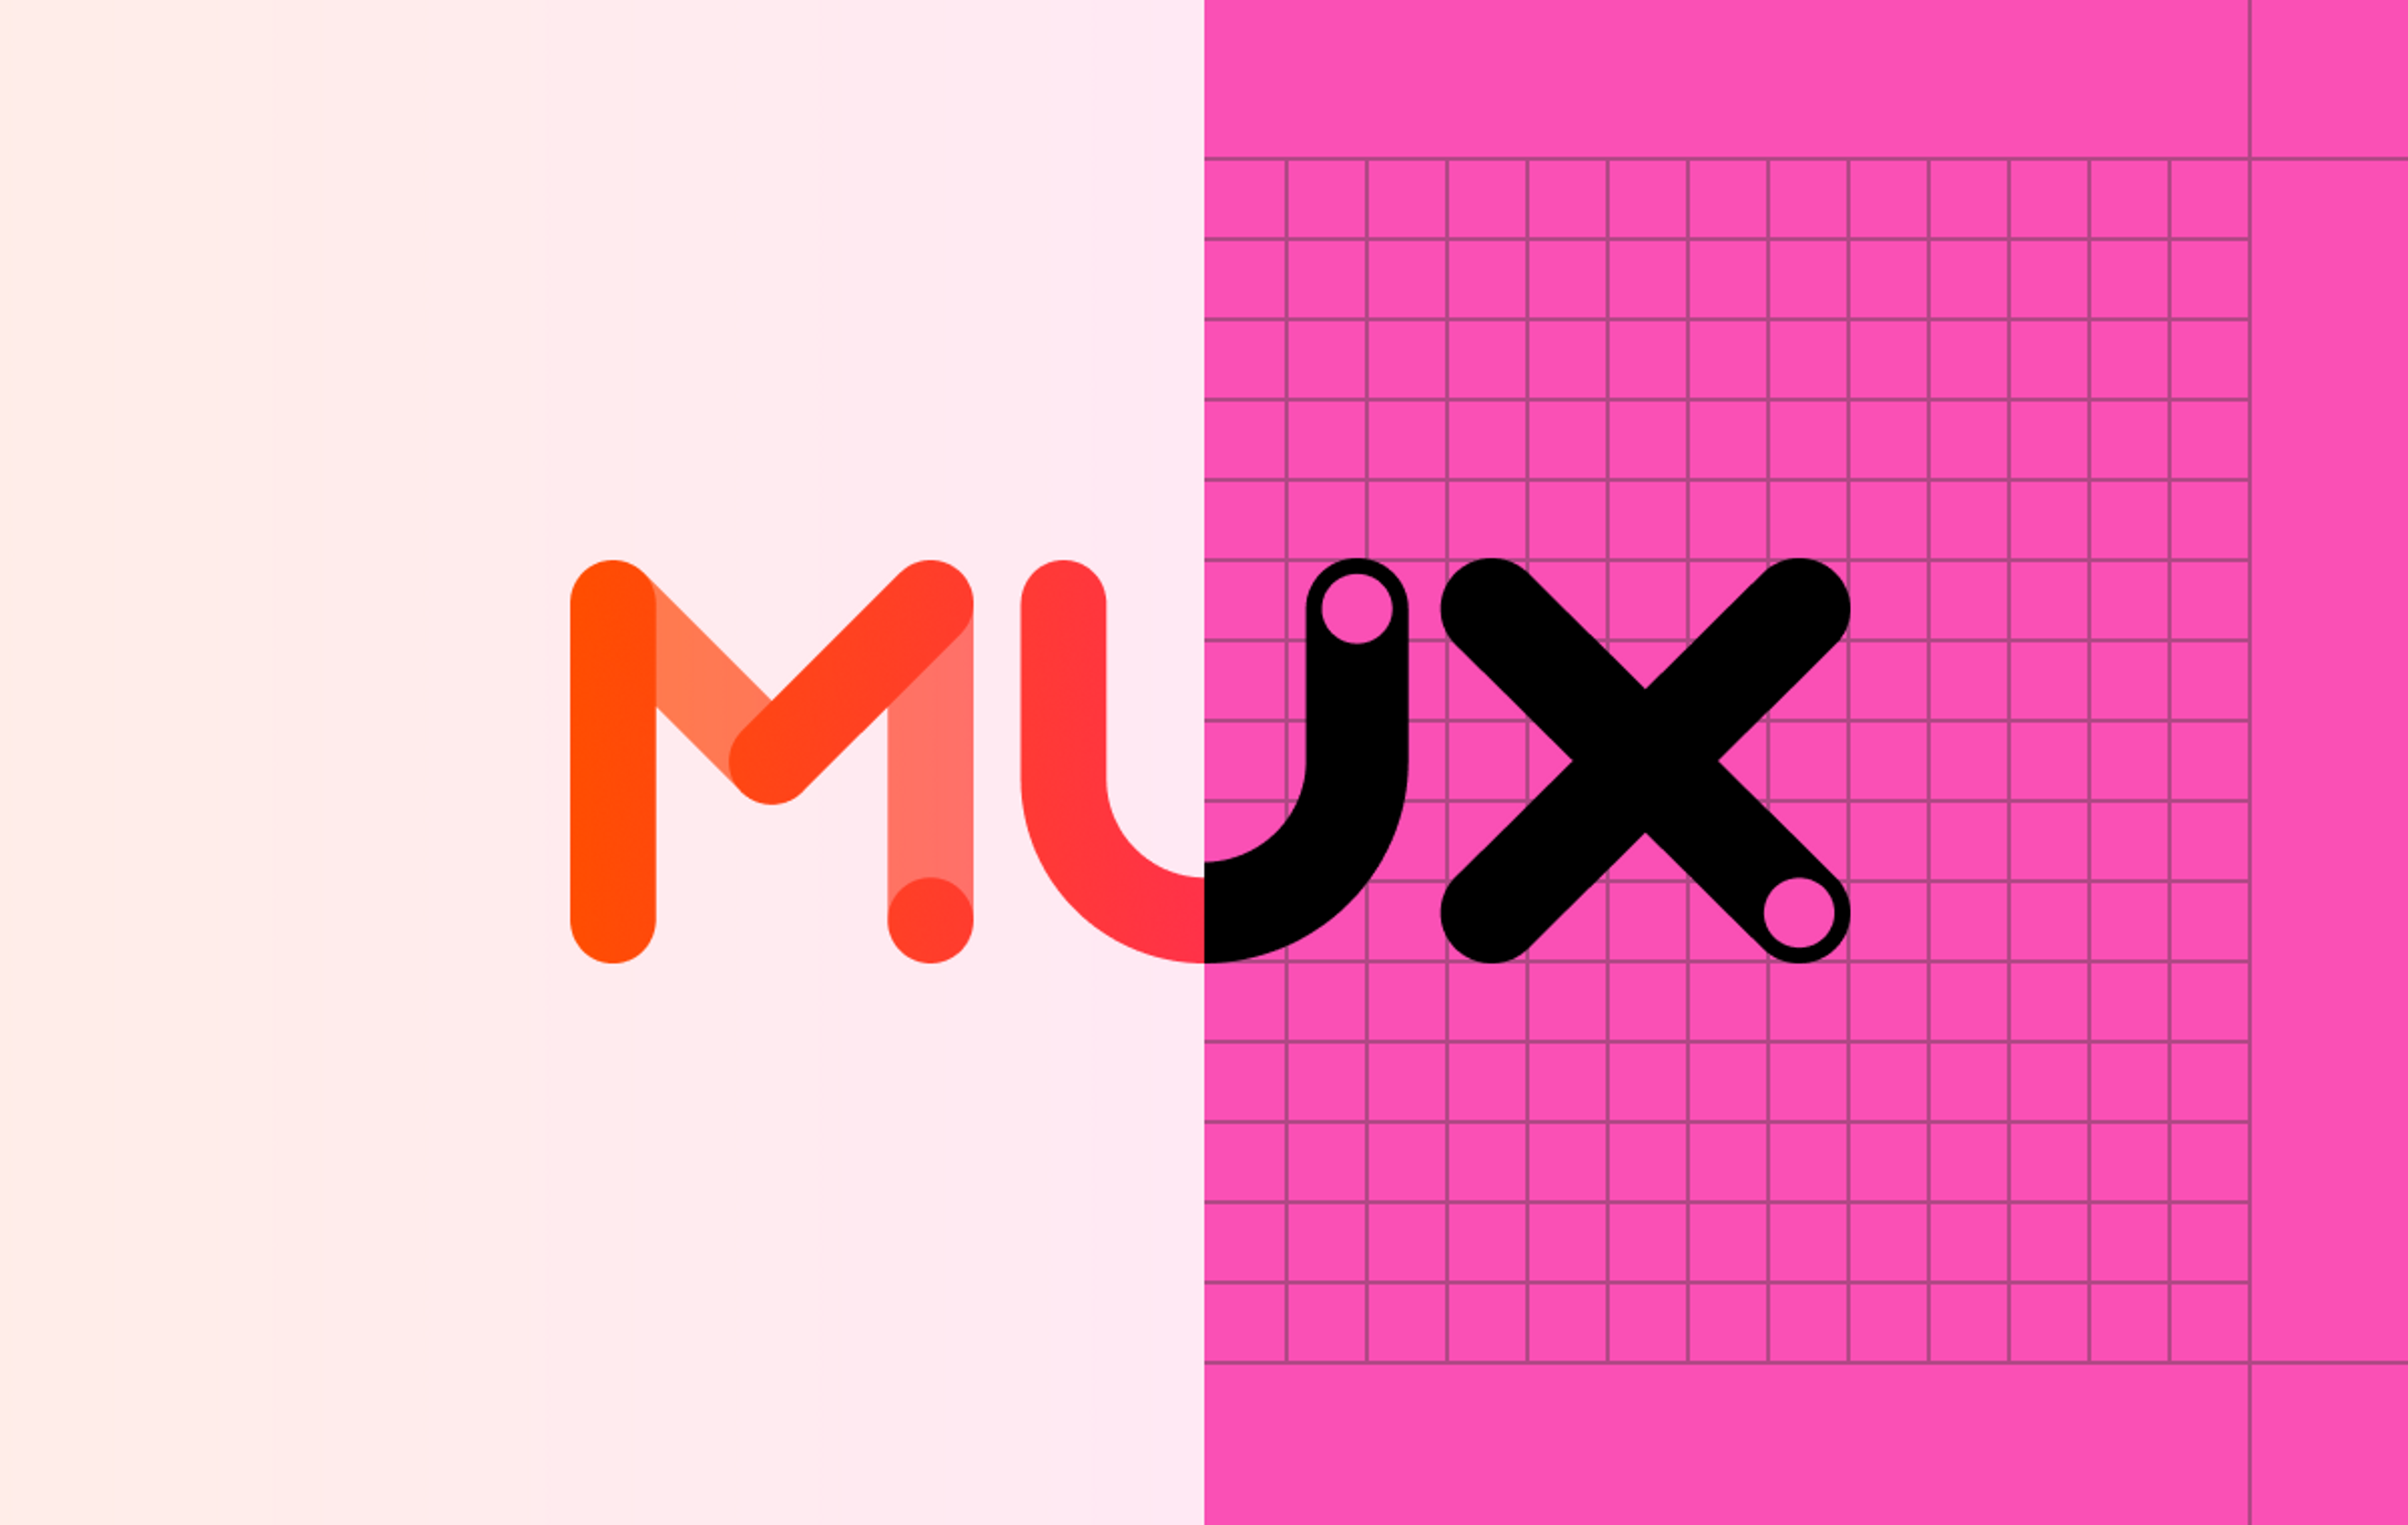 A design showing the old Mux logo transforming into the new Mux logo.